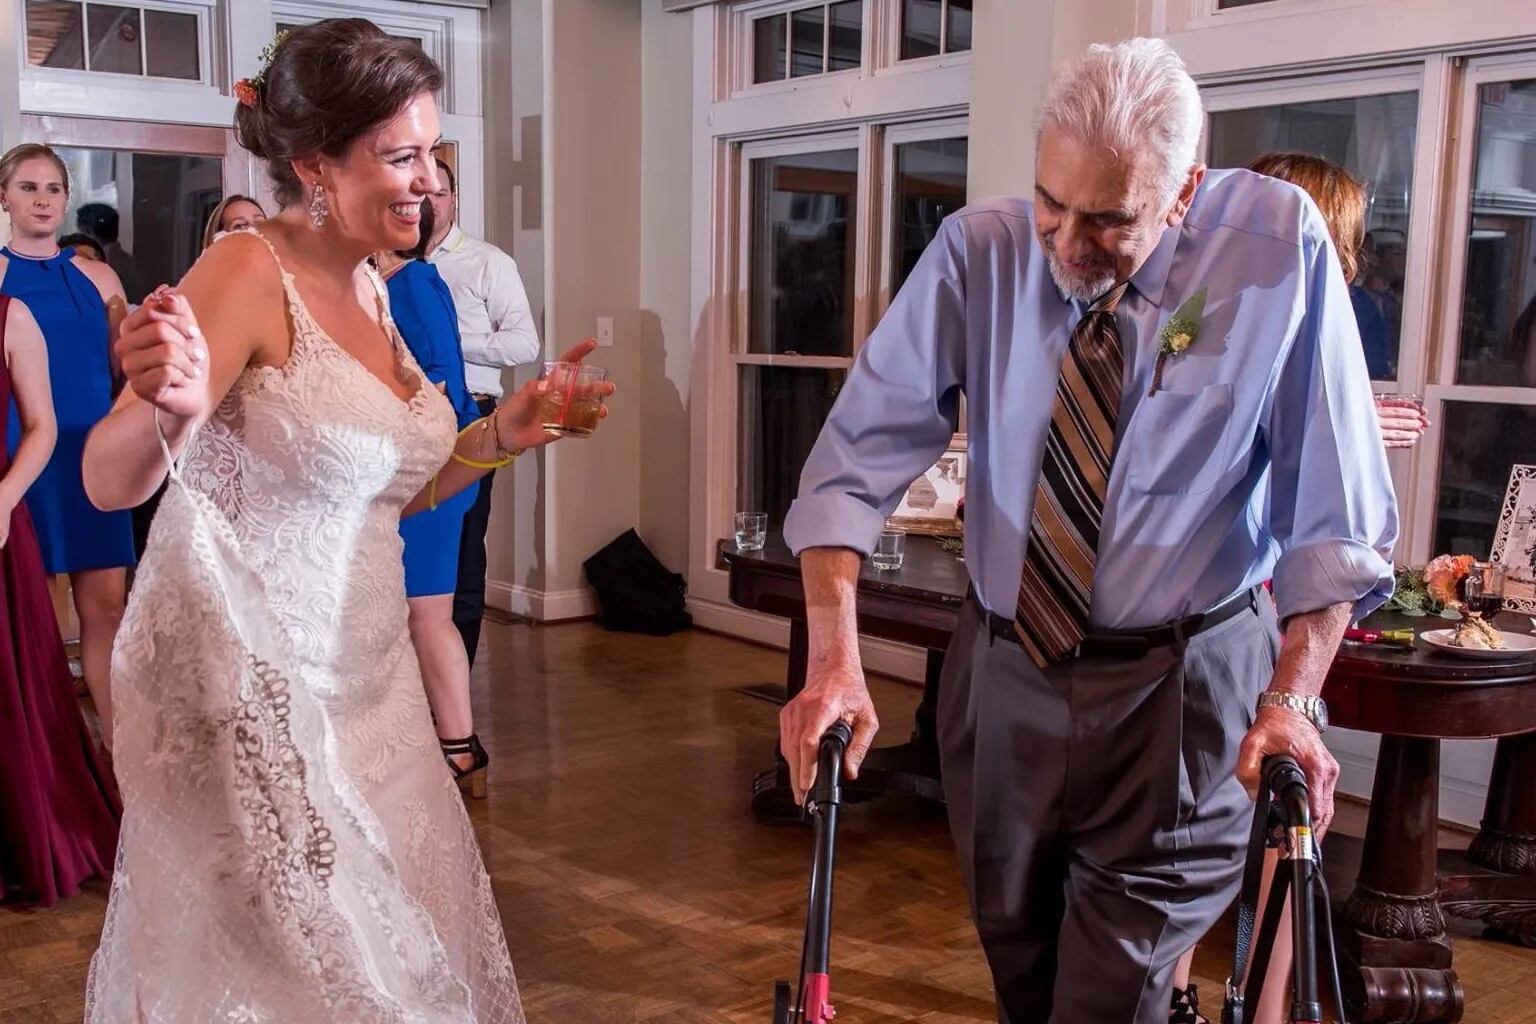 Dr. DeCosmo dances with his granddaughter at her wedding. He always found time for family and friends.